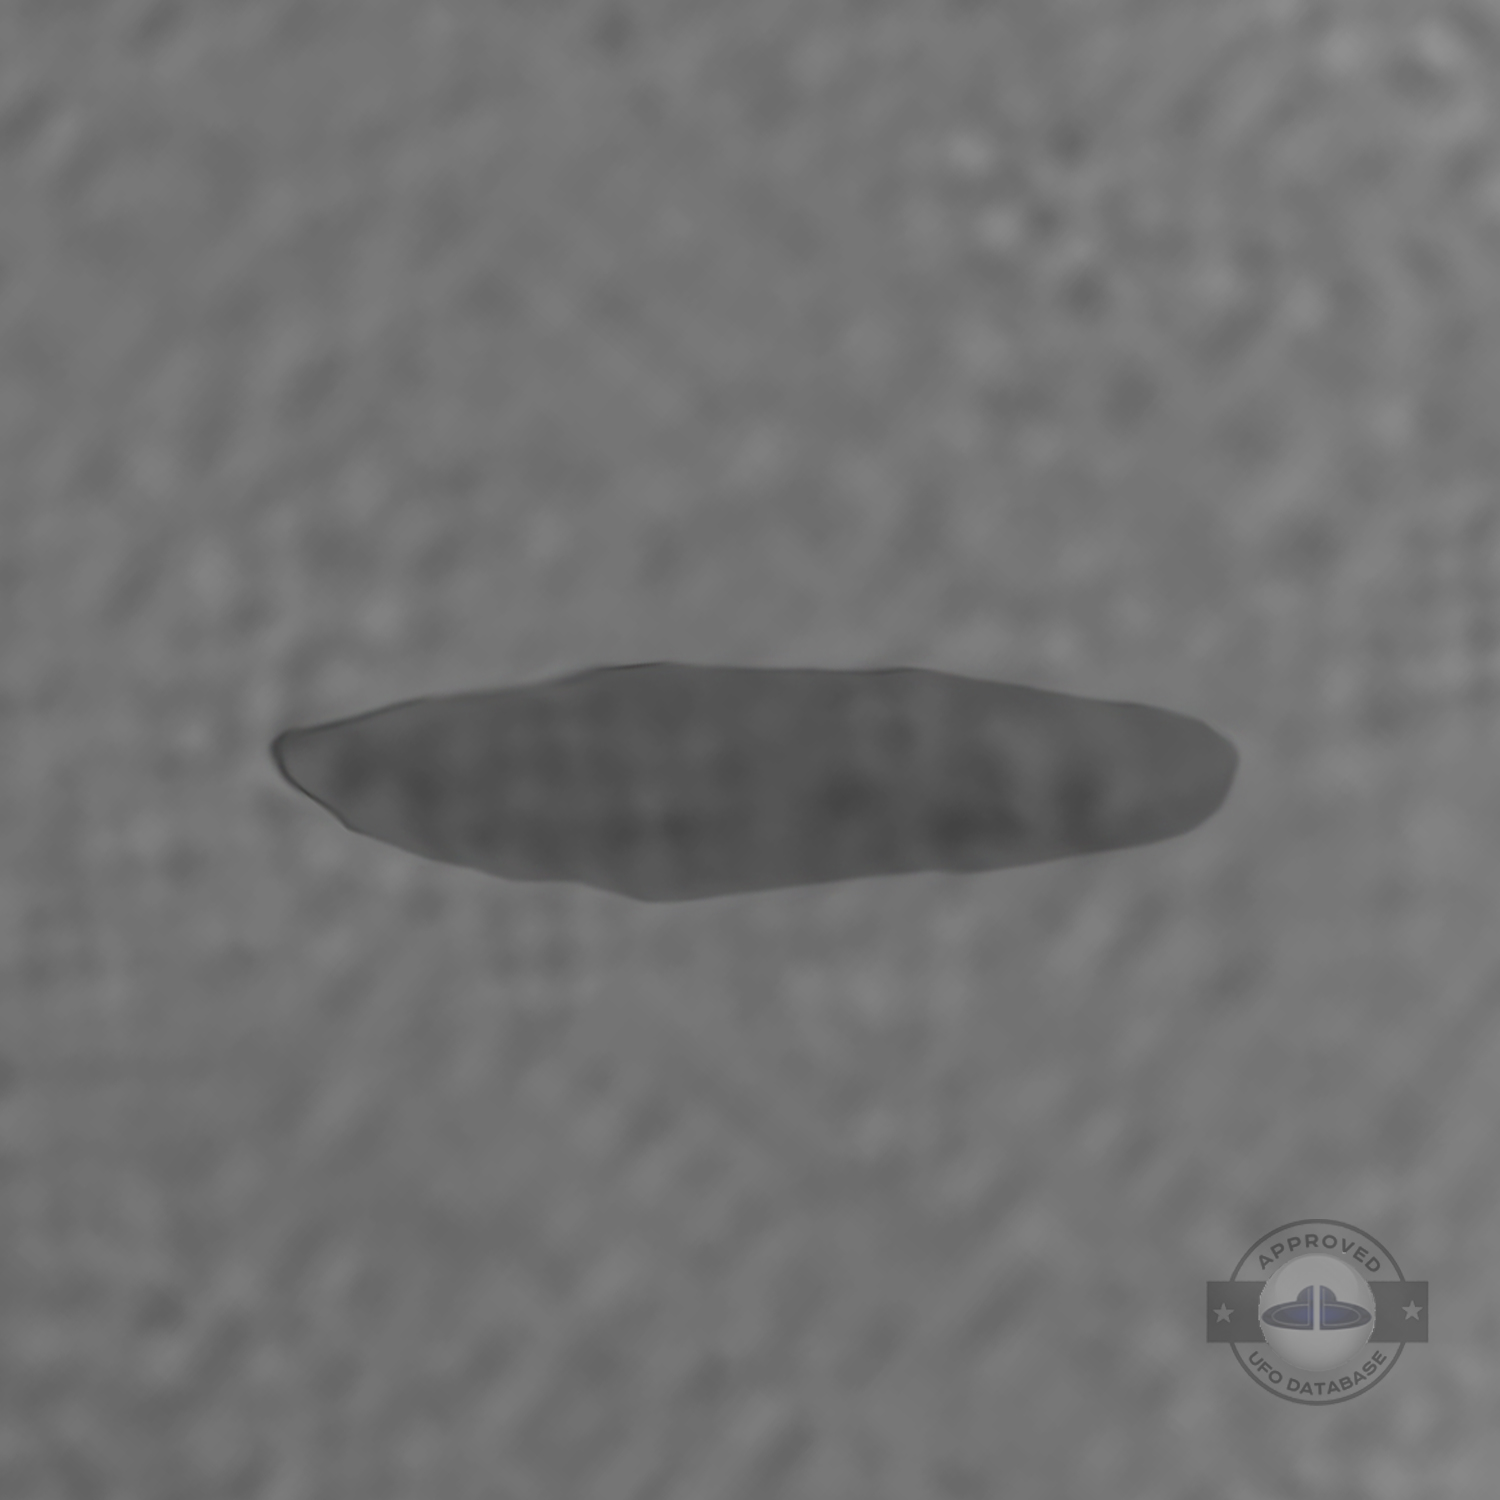 Live Cam capture of UFO USO near water surface | Geisenfeld, Germany UFO Picture #203-5